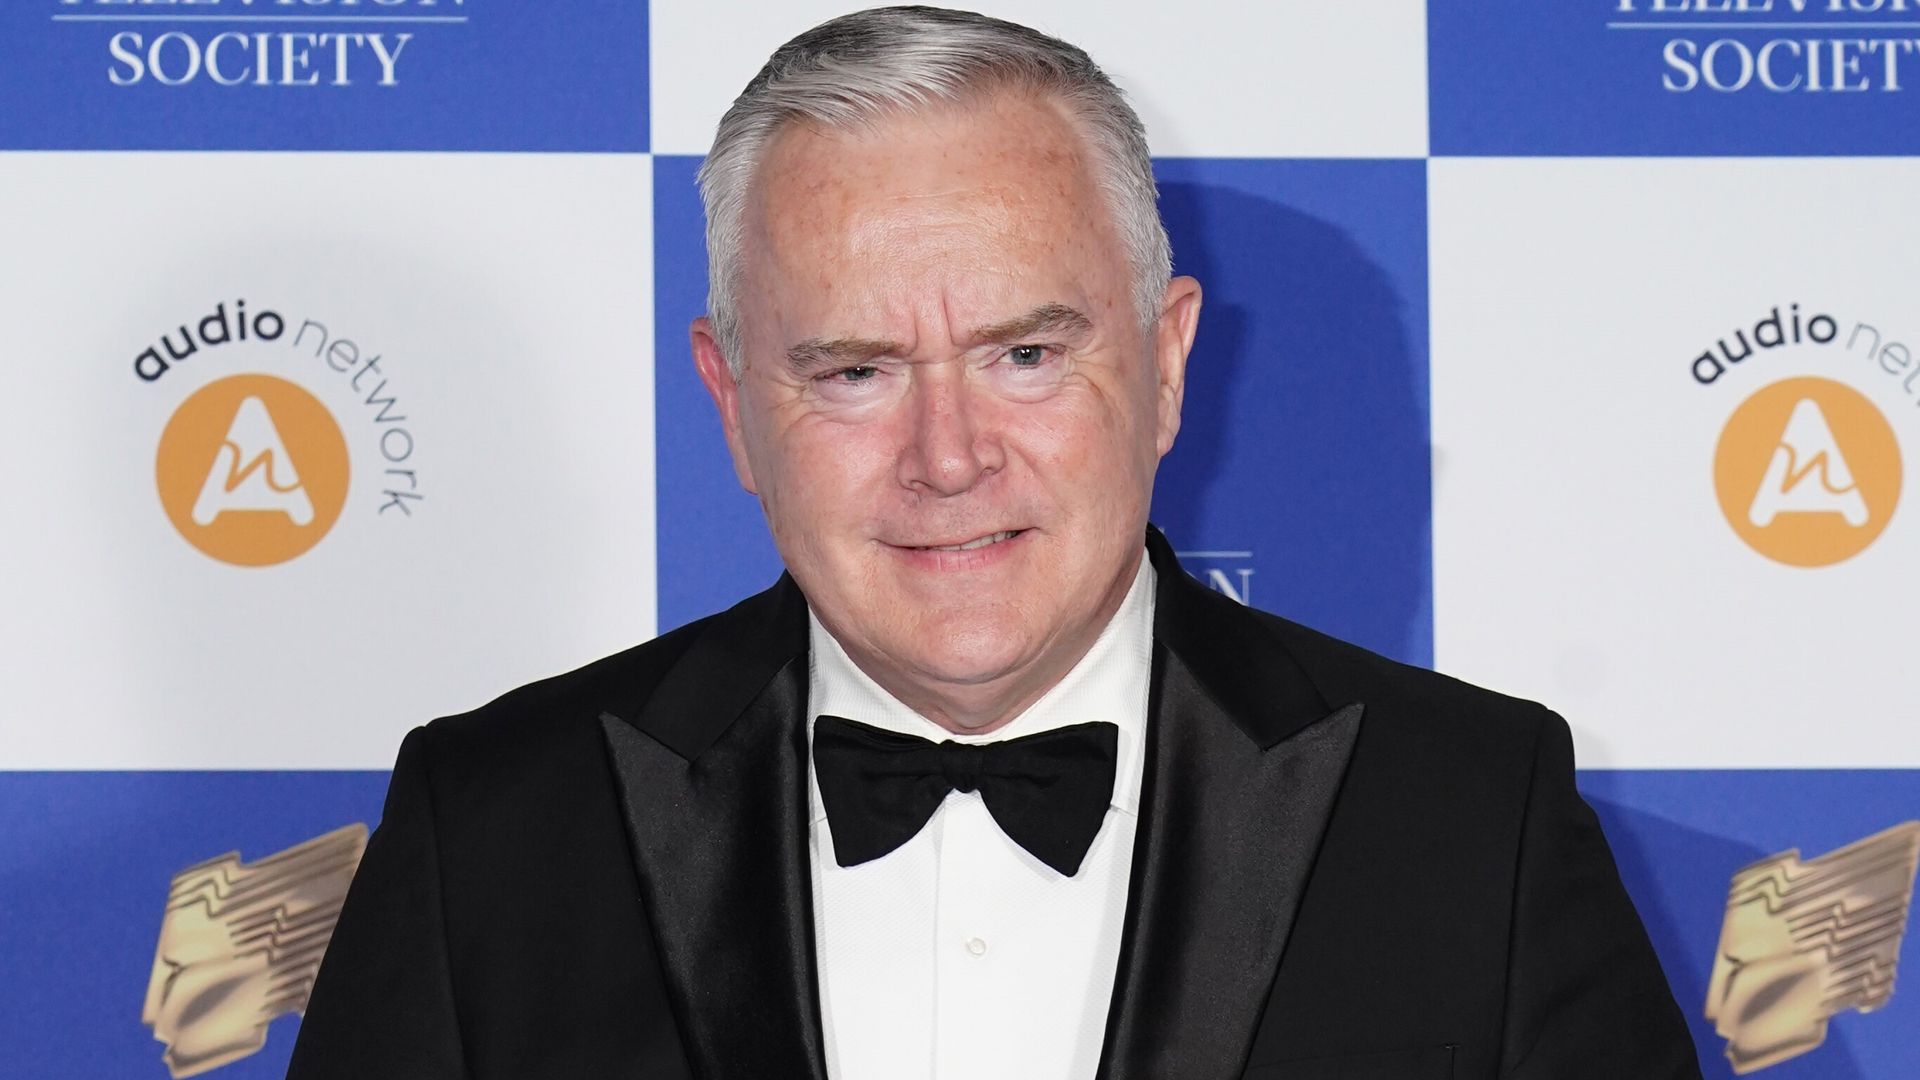 Huw Edwards set to appear in court over indecent images charges